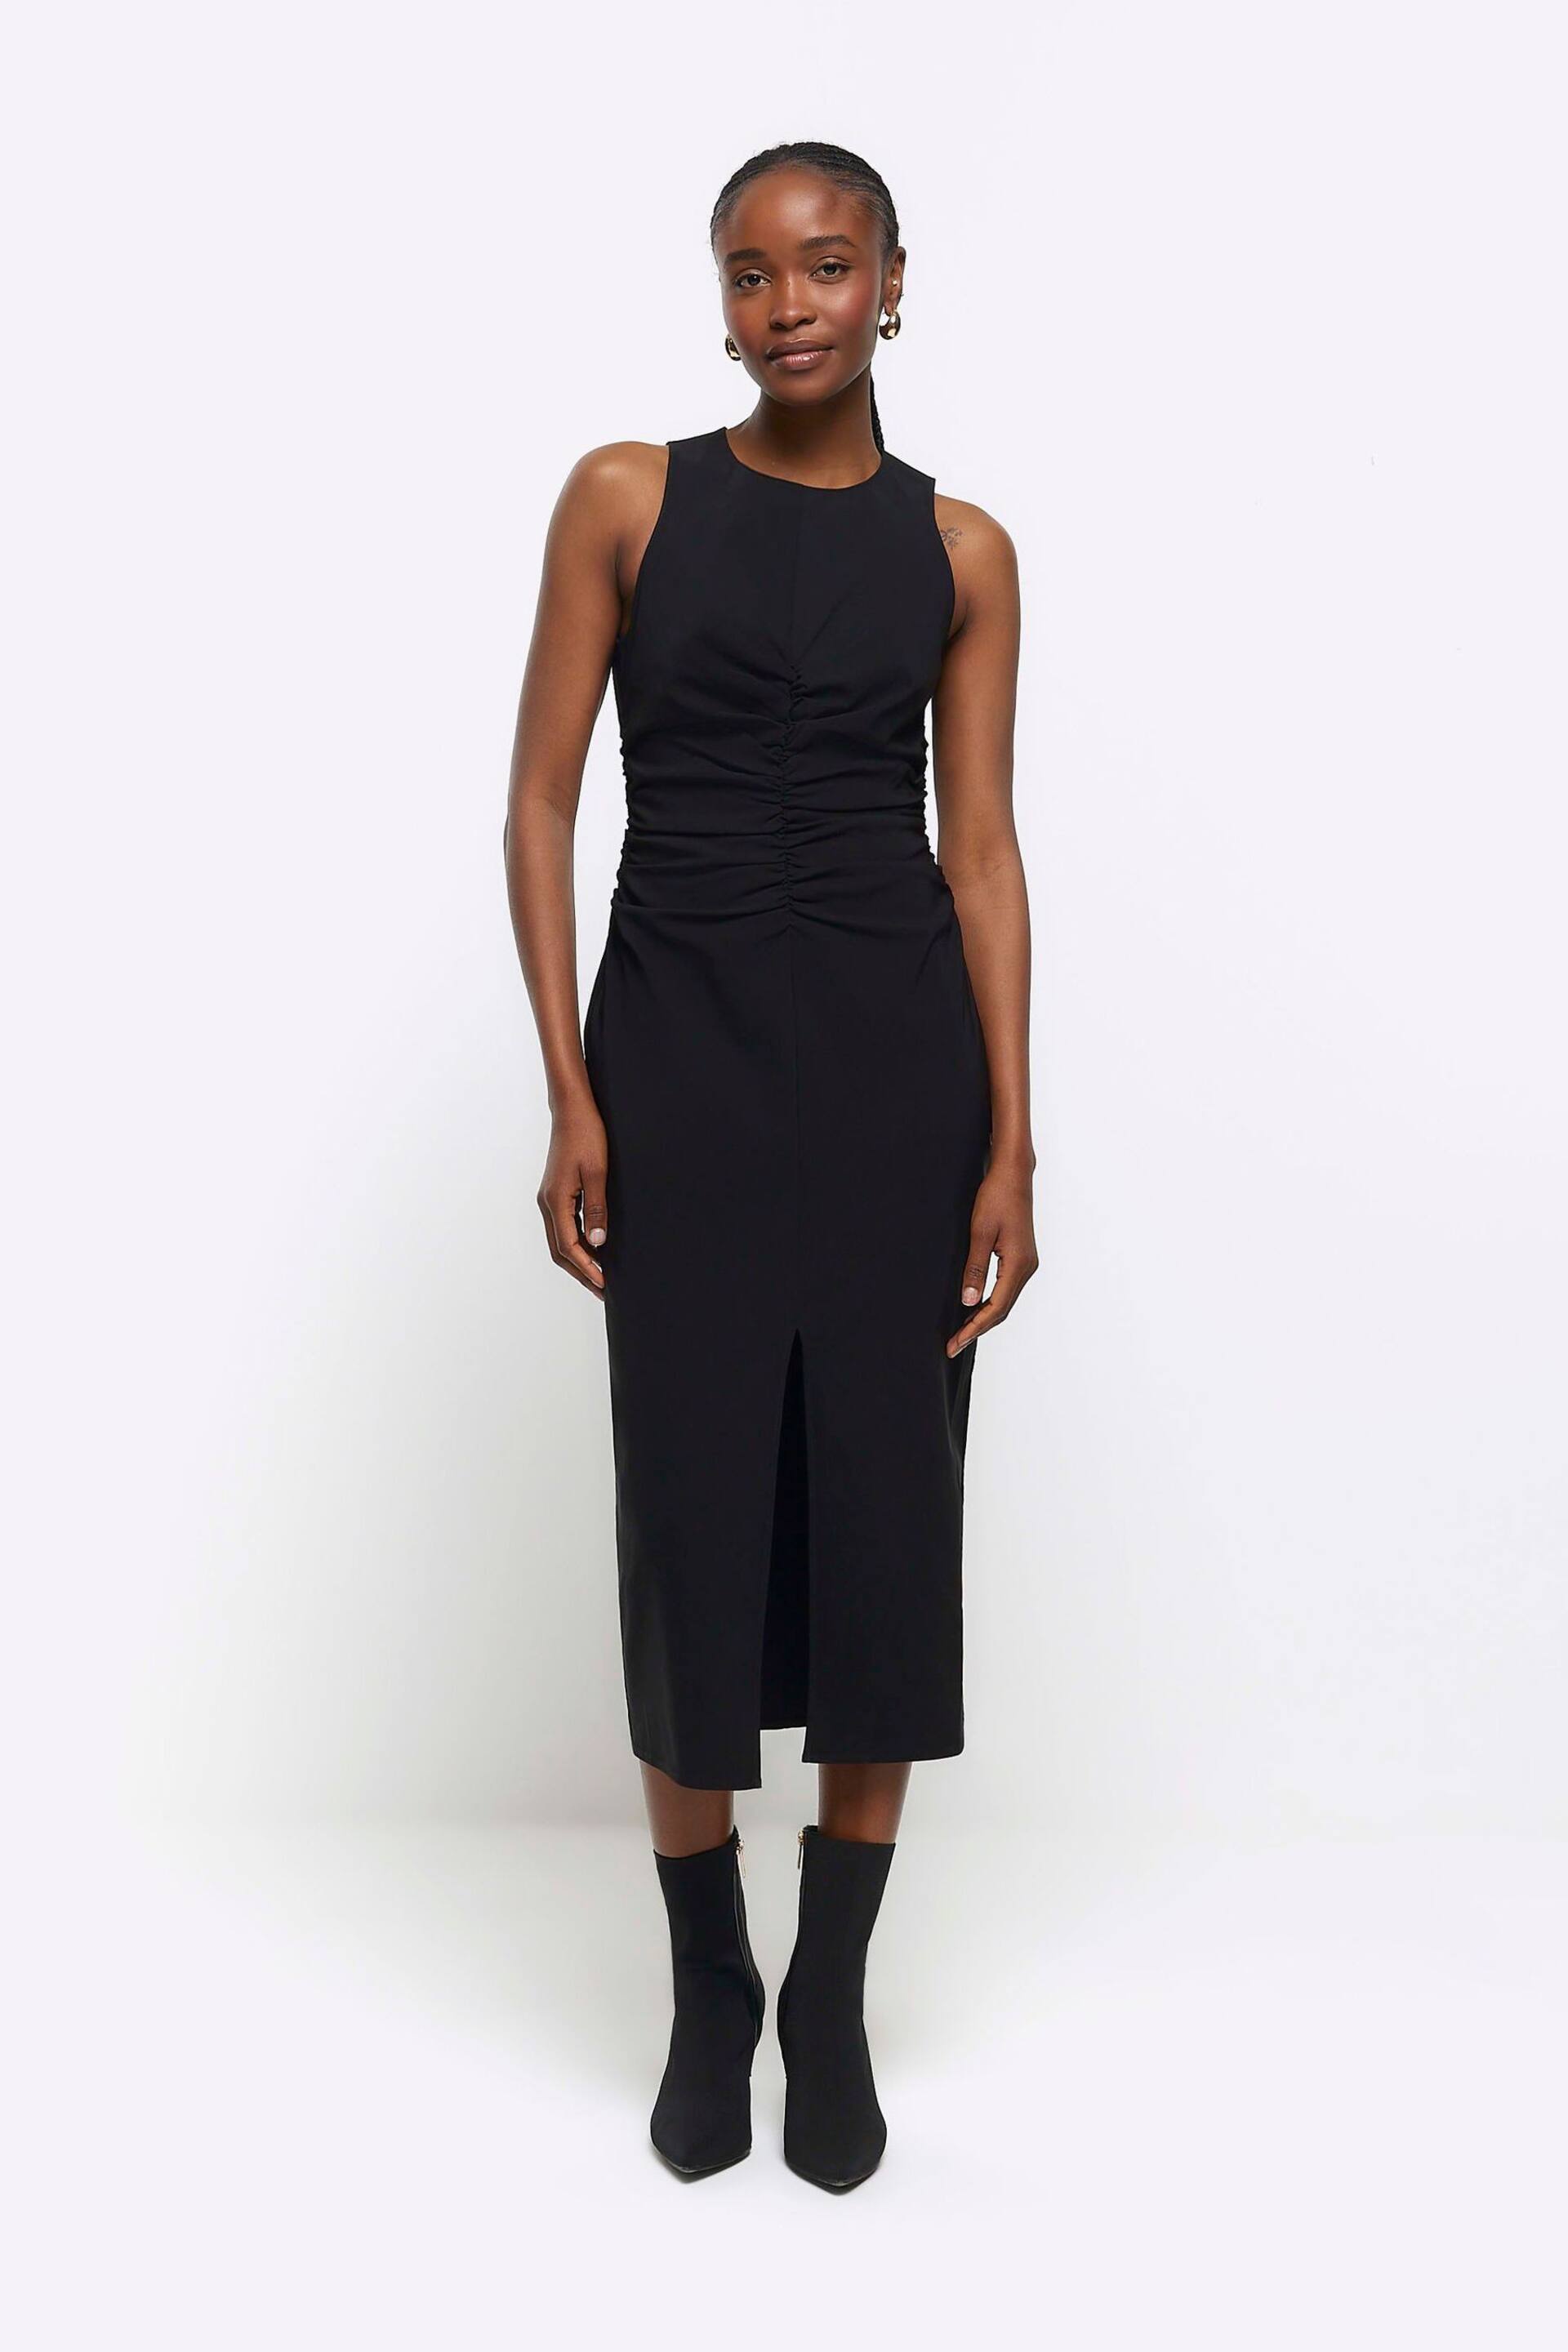 River Island Black Sleeveless Ruched Detail Dress - Image 1 of 4